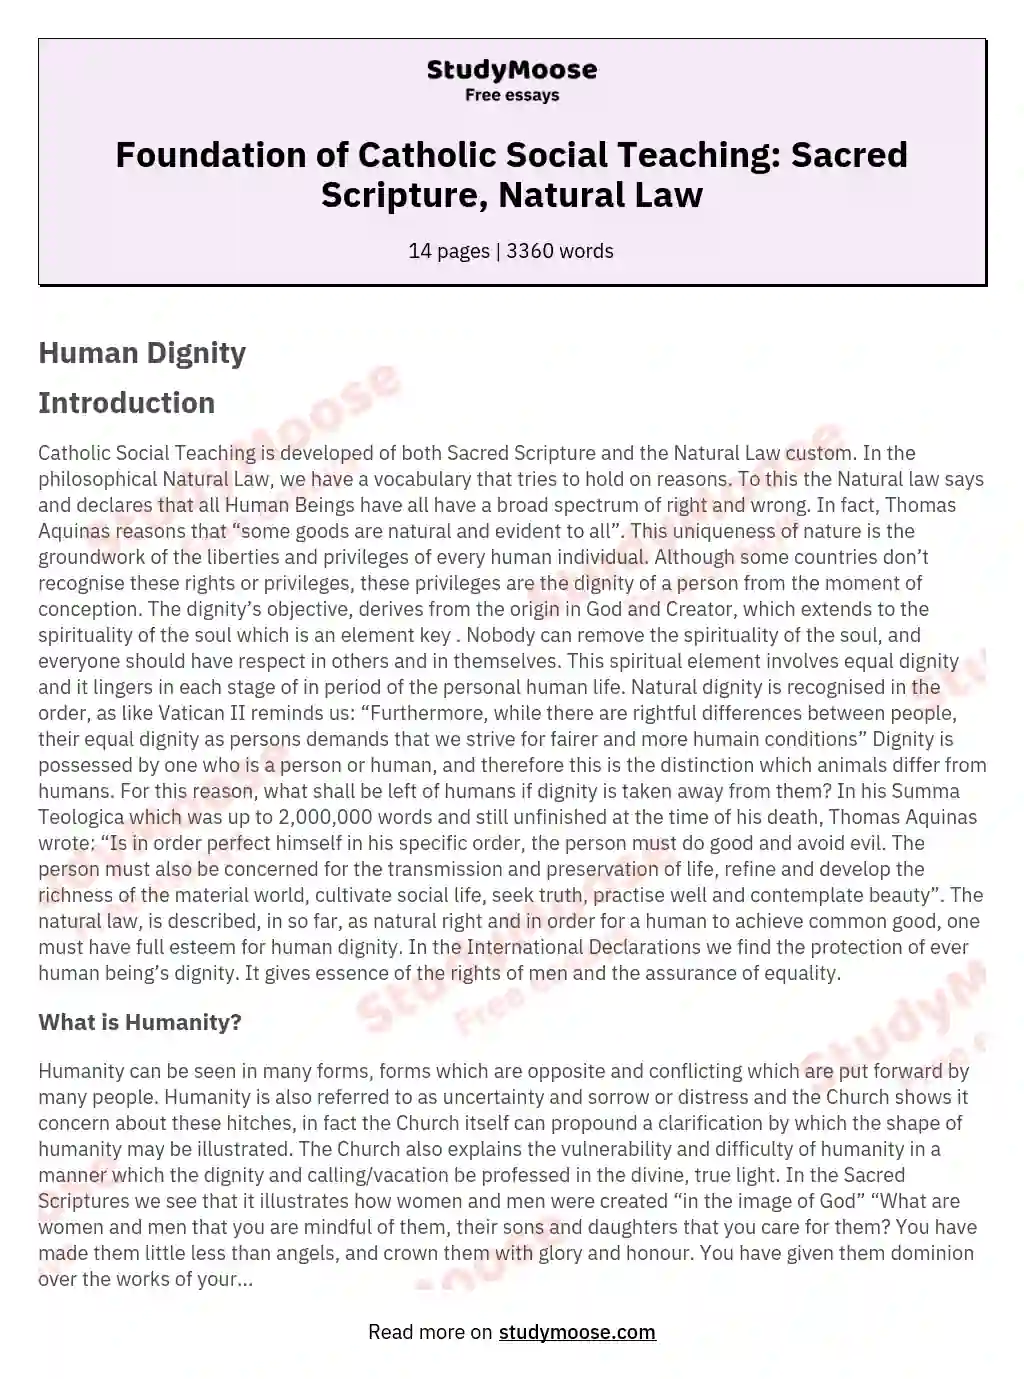 Foundation of Catholic Social Teaching: Sacred Scripture, Natural Law essay